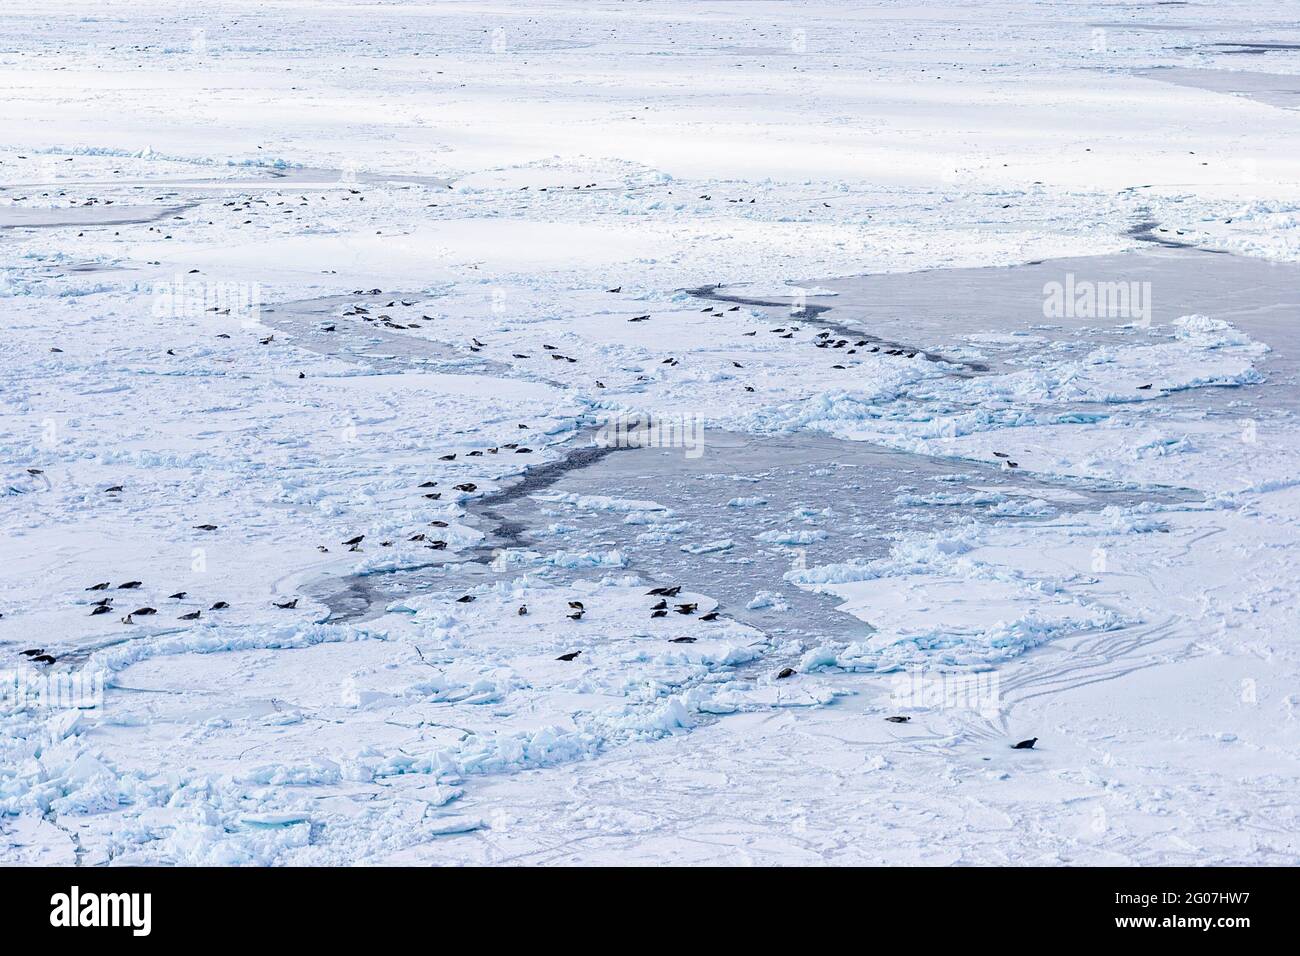 Seal colony on ice floes. HSUS Photoshoot March 2006, Save the seals campain on the ice floes north of Prince Edward Island, northeast off Magdalen Is Stock Photo